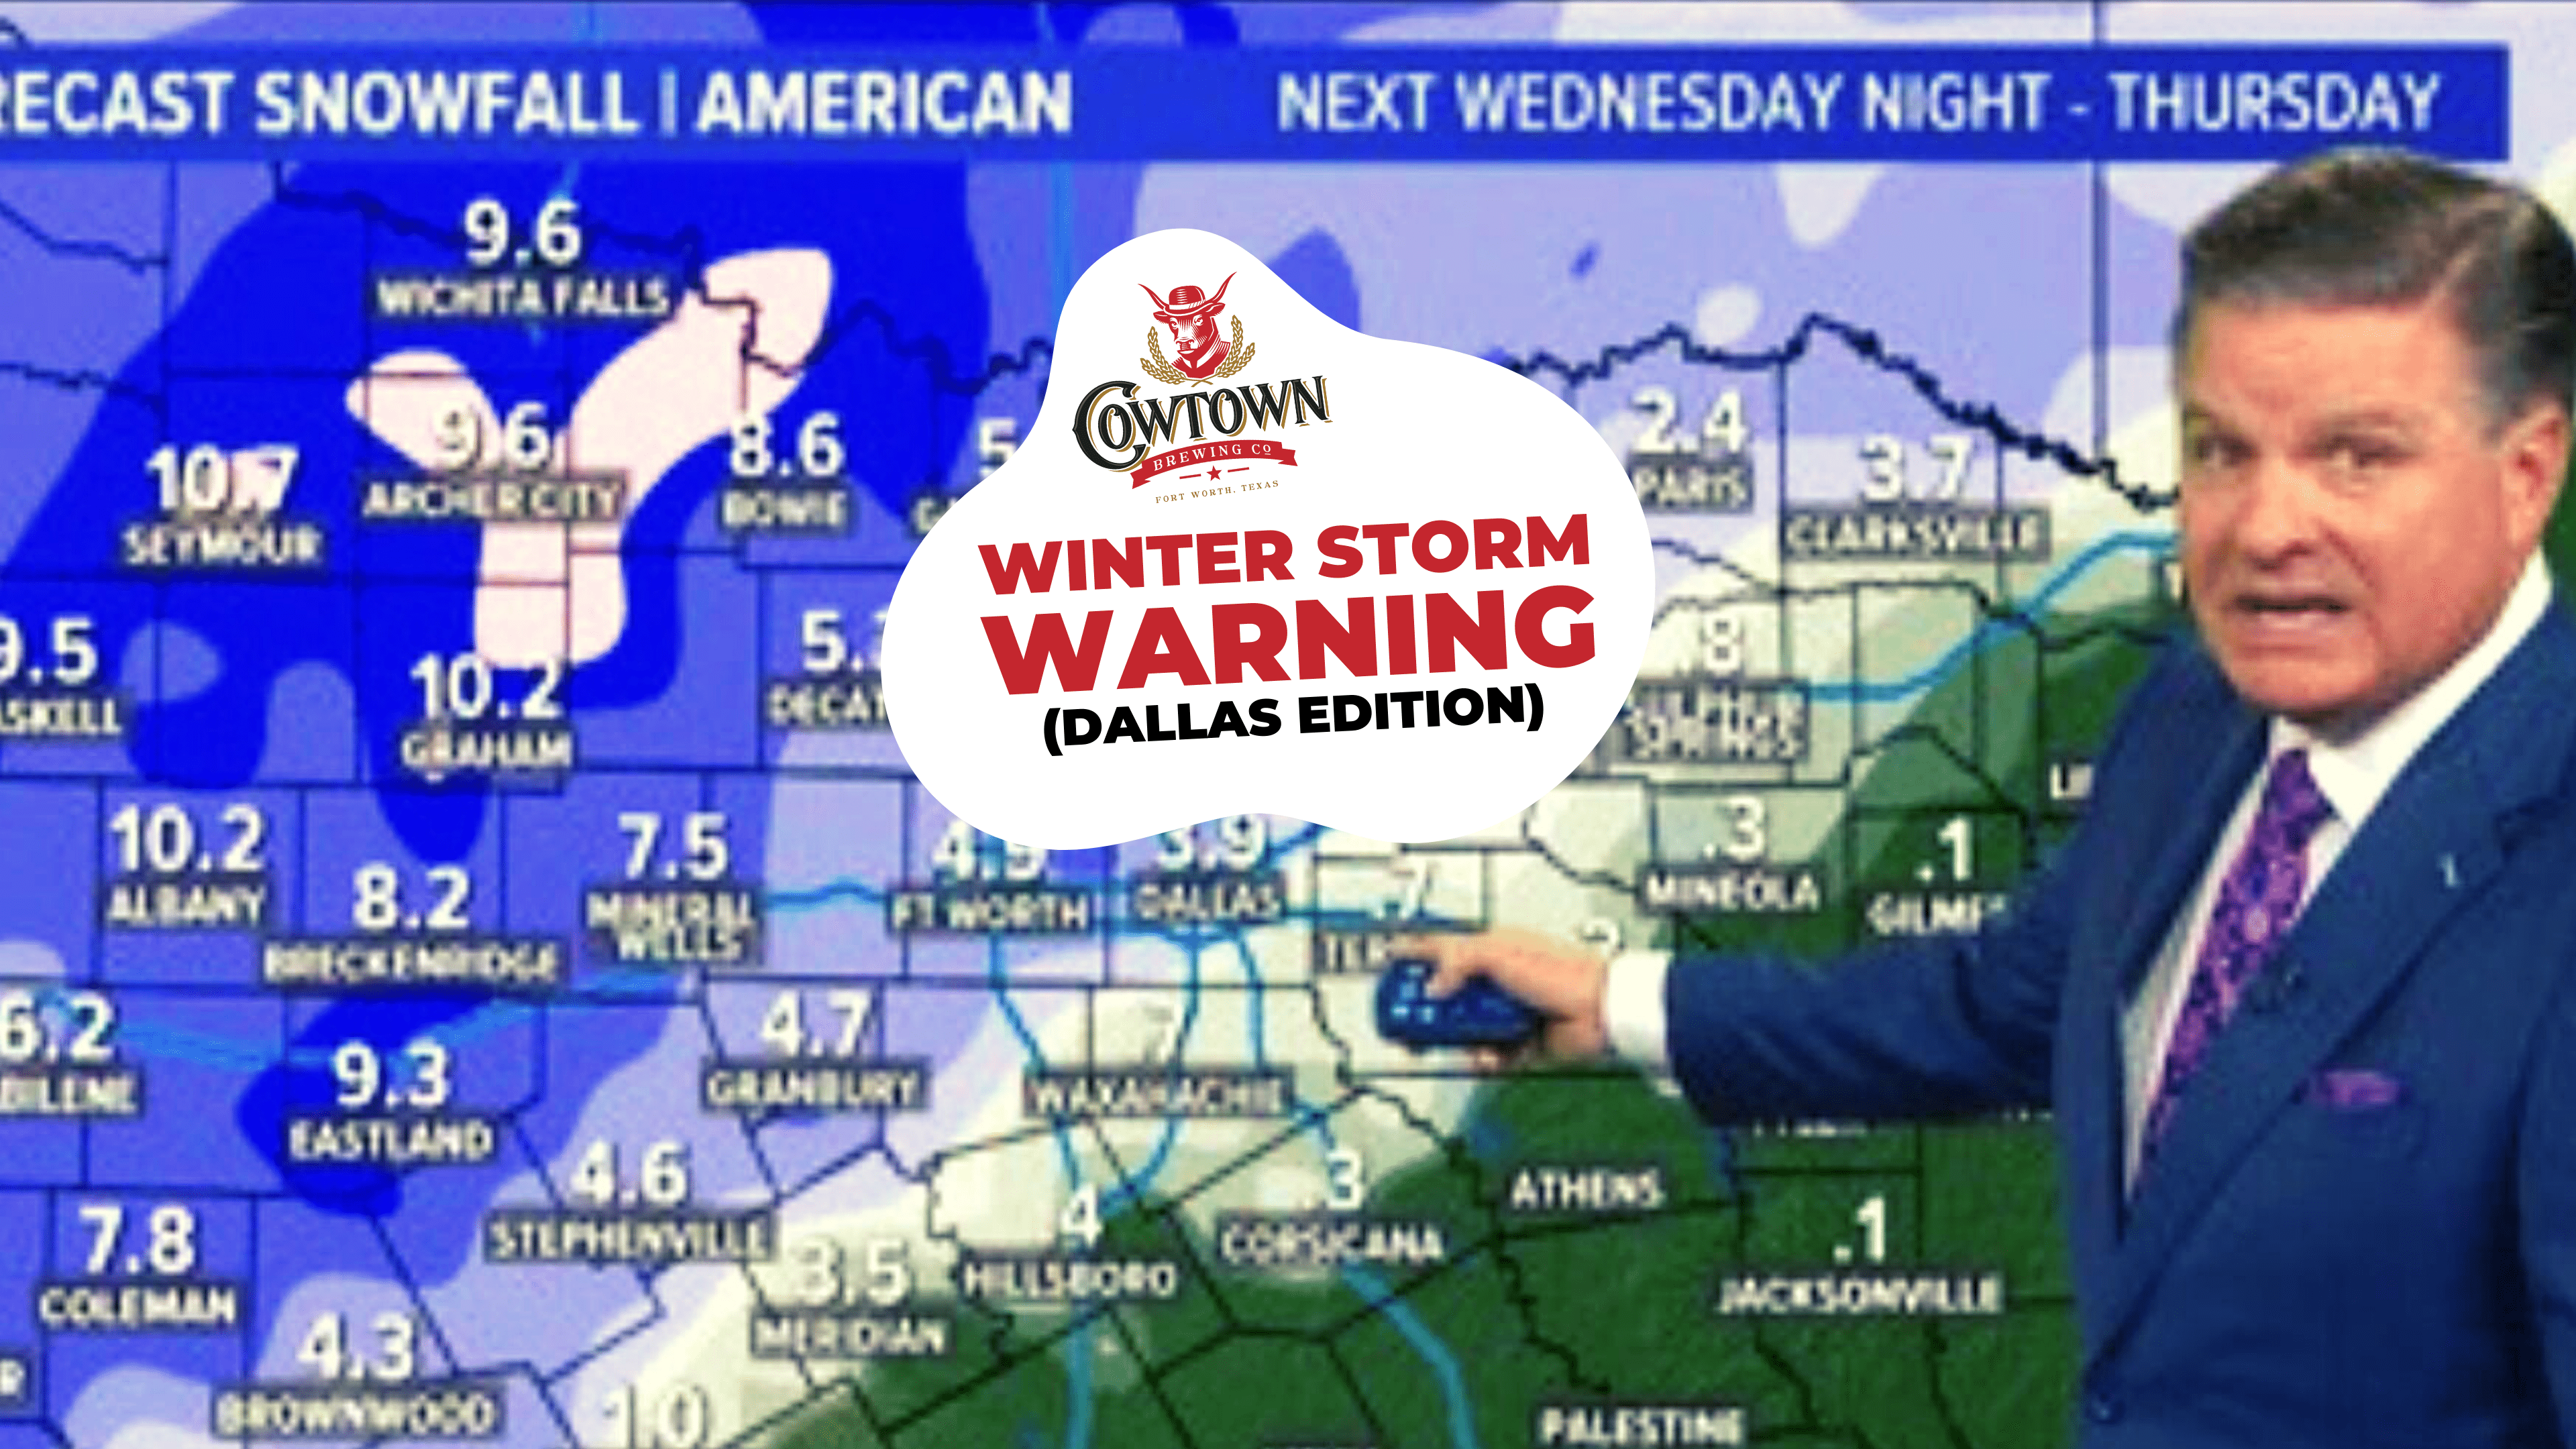 Winter Storm Warning Cold IPA Release, Dallas collaboration with Cowtown Brewing